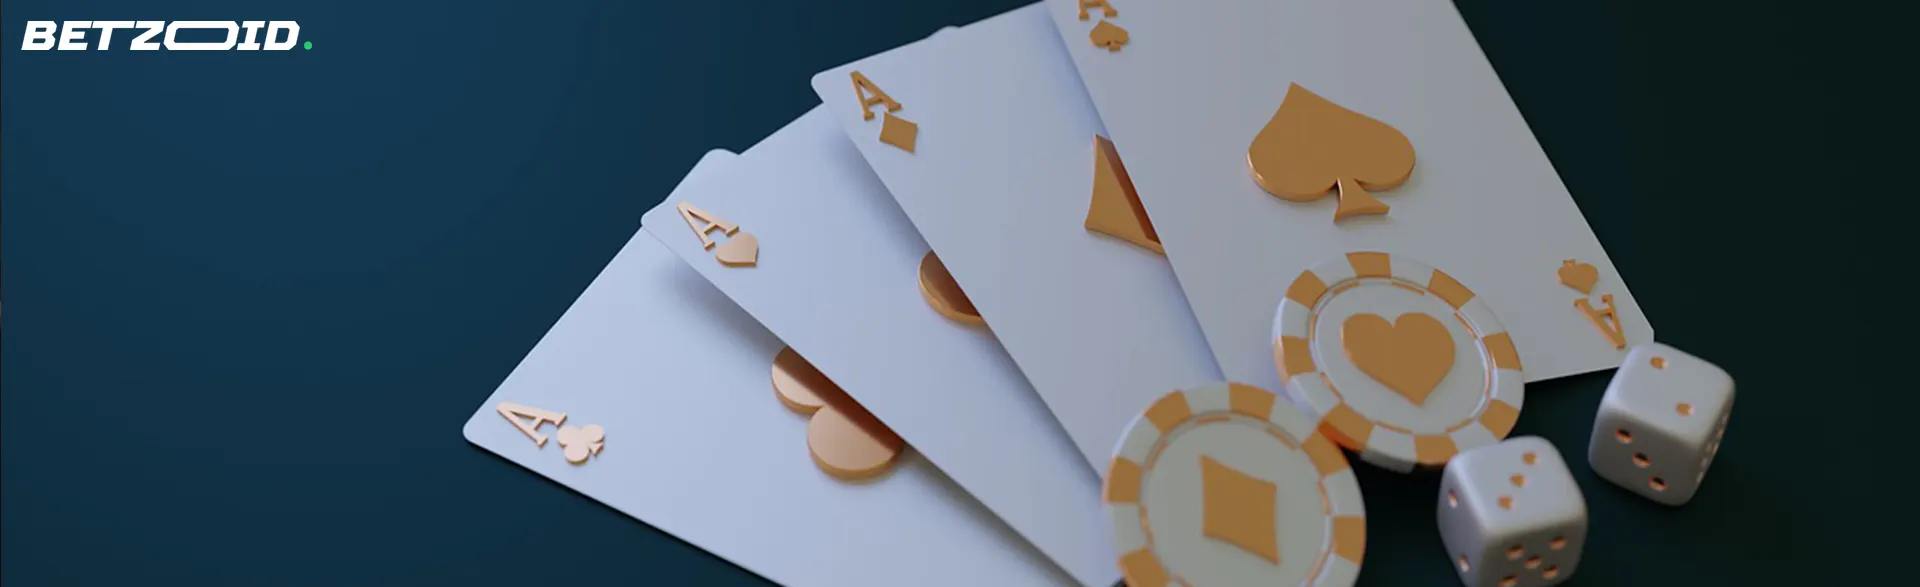 Three playing cards with a golden ace, as well as poker chips and dice on a dark blue background.